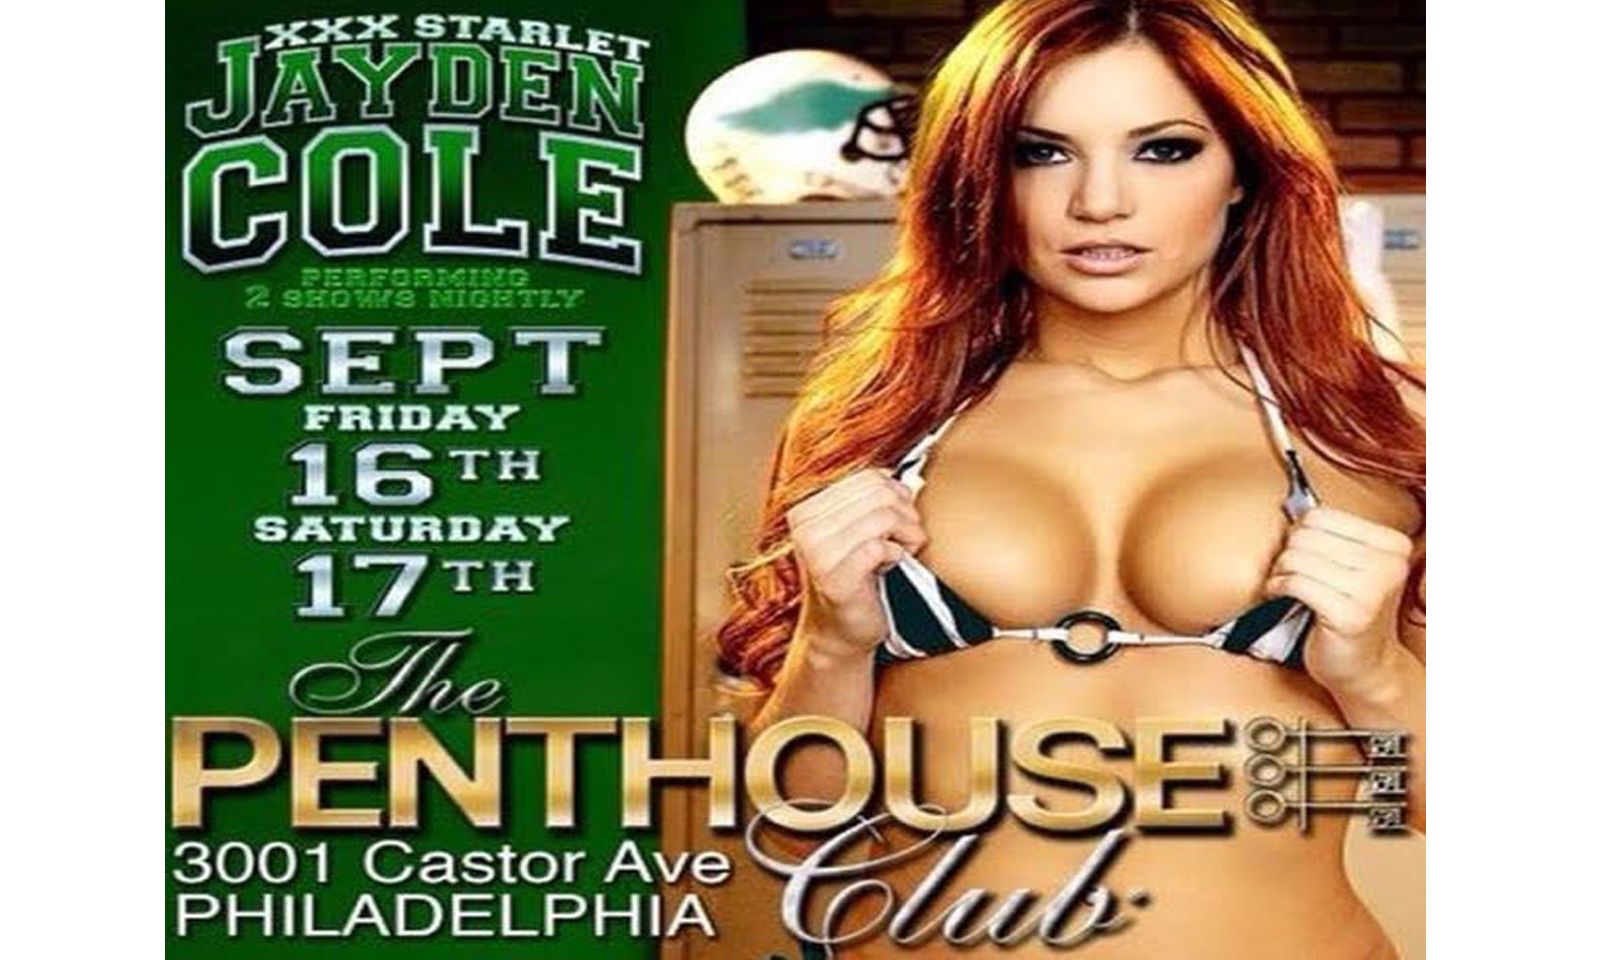 Jayden Cole at The Penthouse Club in Philly This Weekend